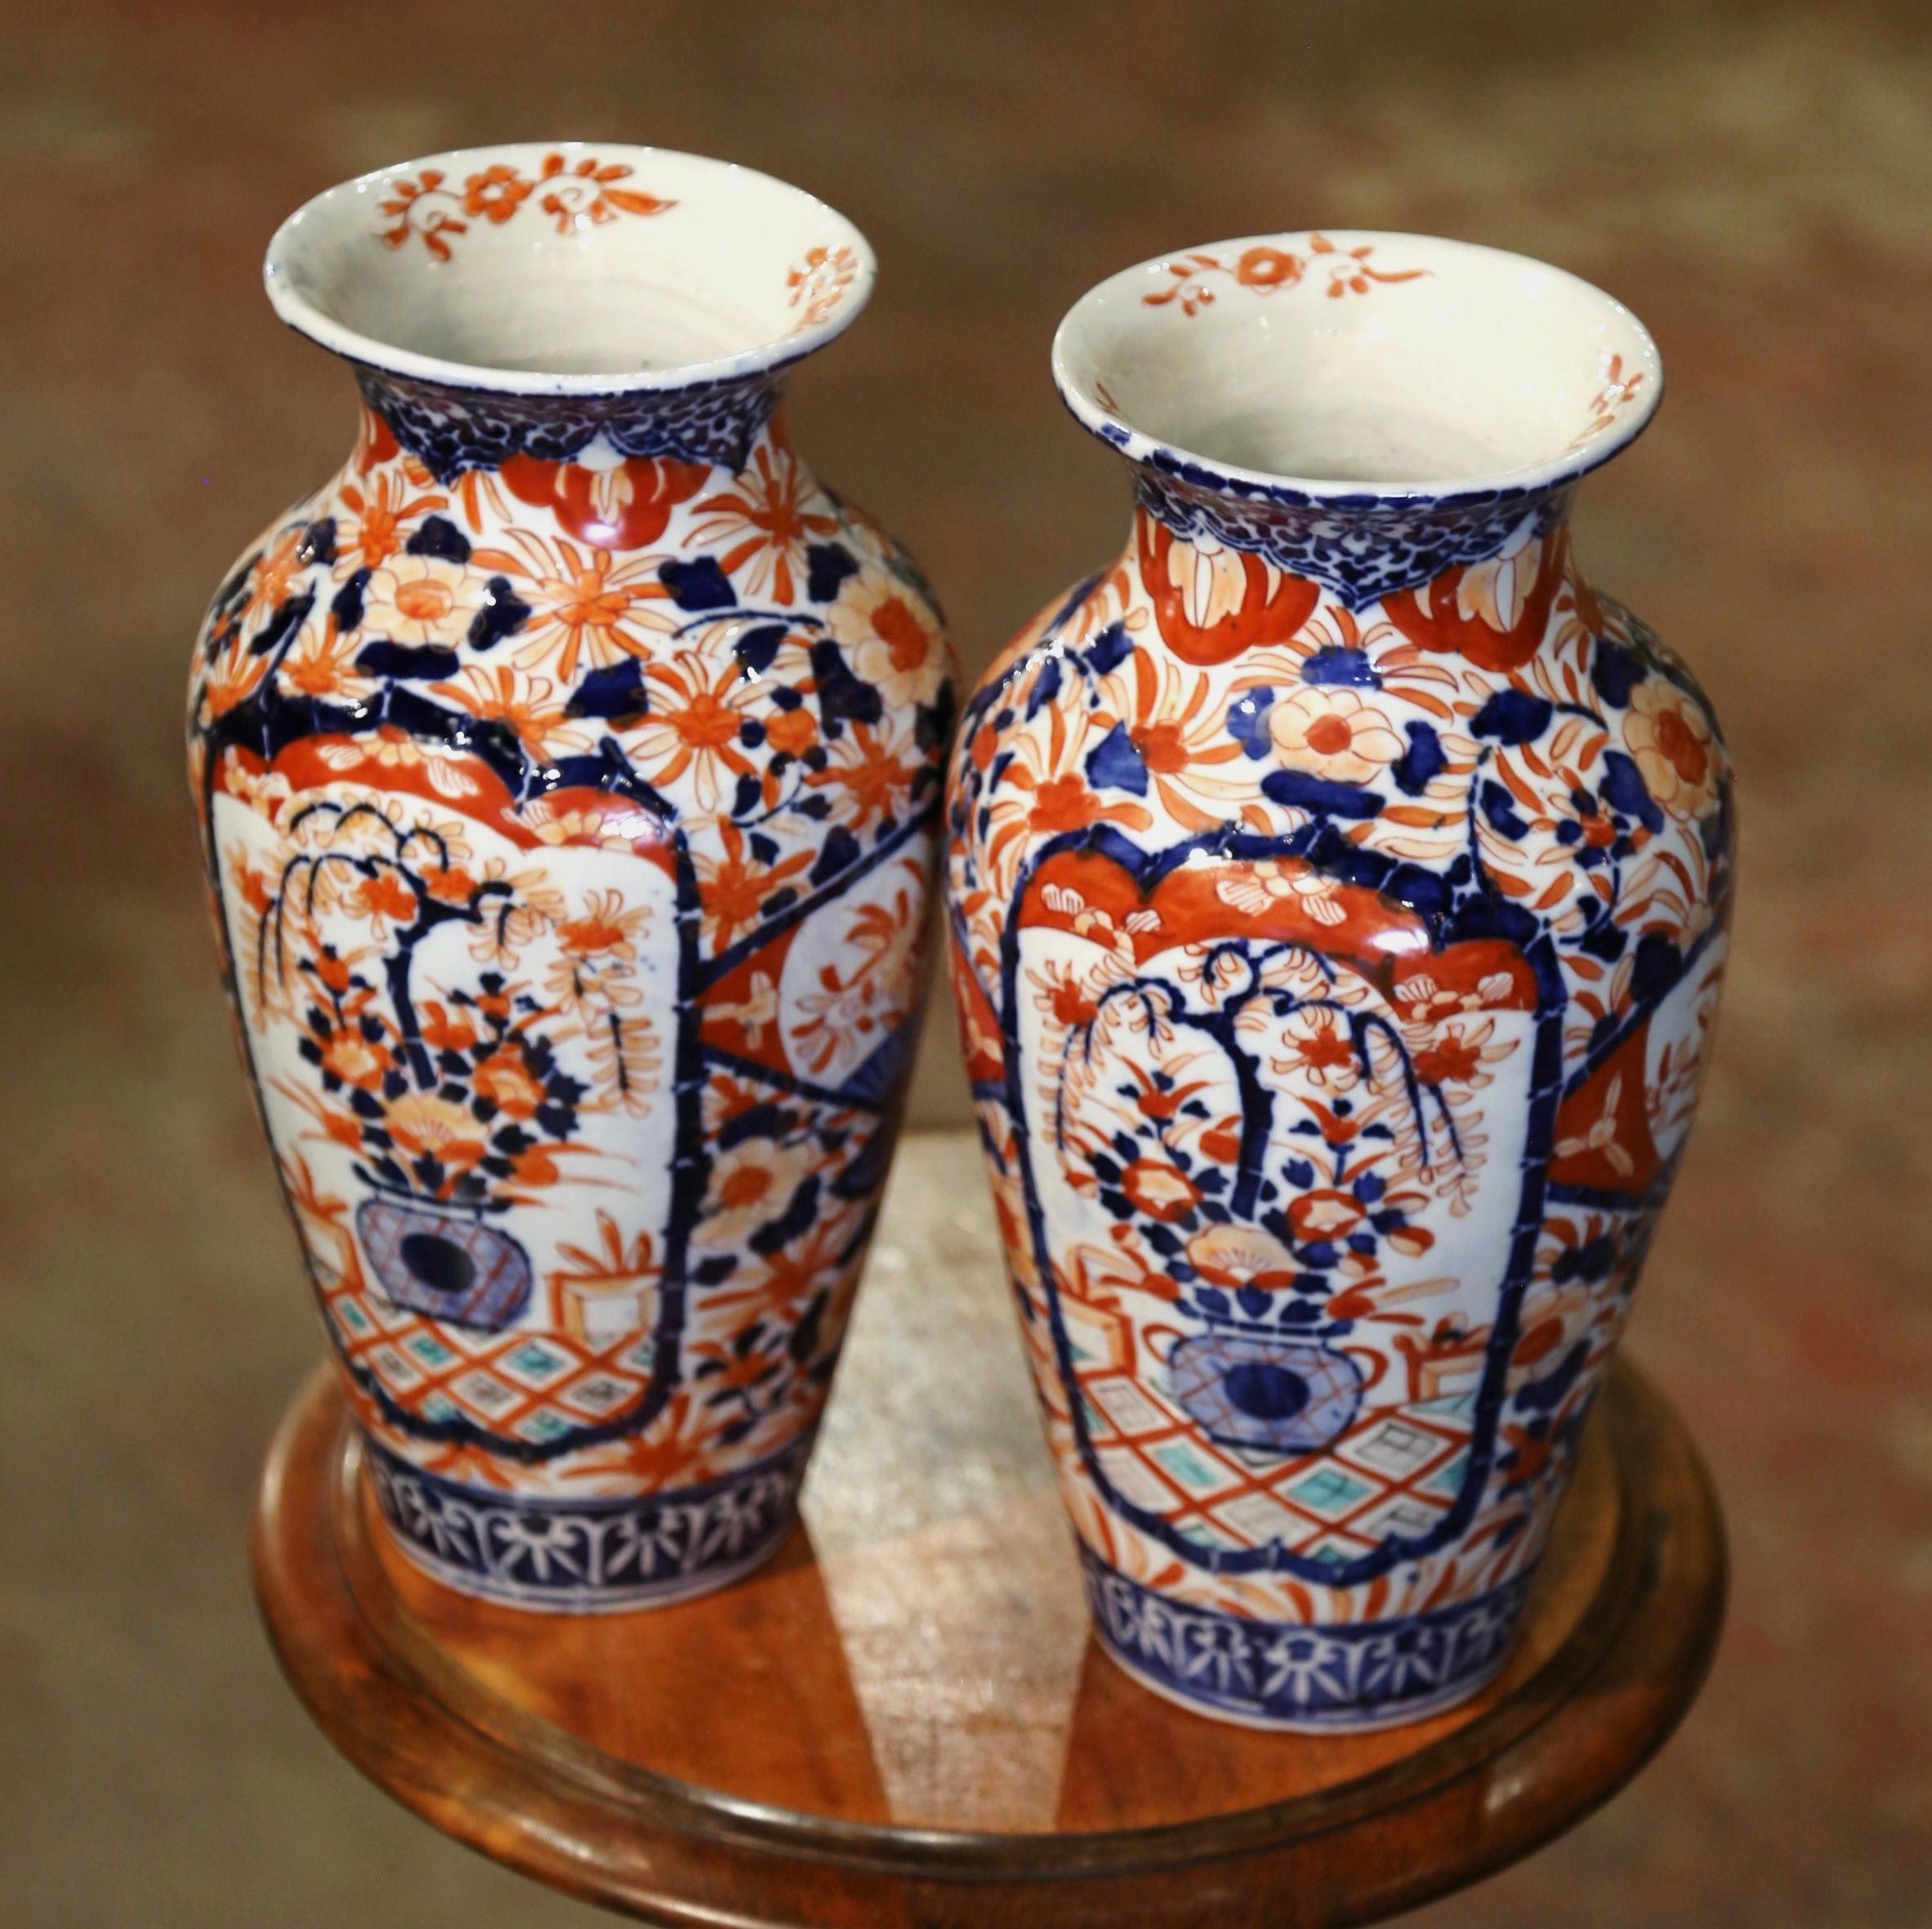 Decorate a mantel or a buffet with this colorful pair of antique Imari vases. Crafted in Japan, circa 1880 and round in shape, the ceramic vessels are hand painted with floral and plant motifs in the traditional rust, white and blue Imari palette.